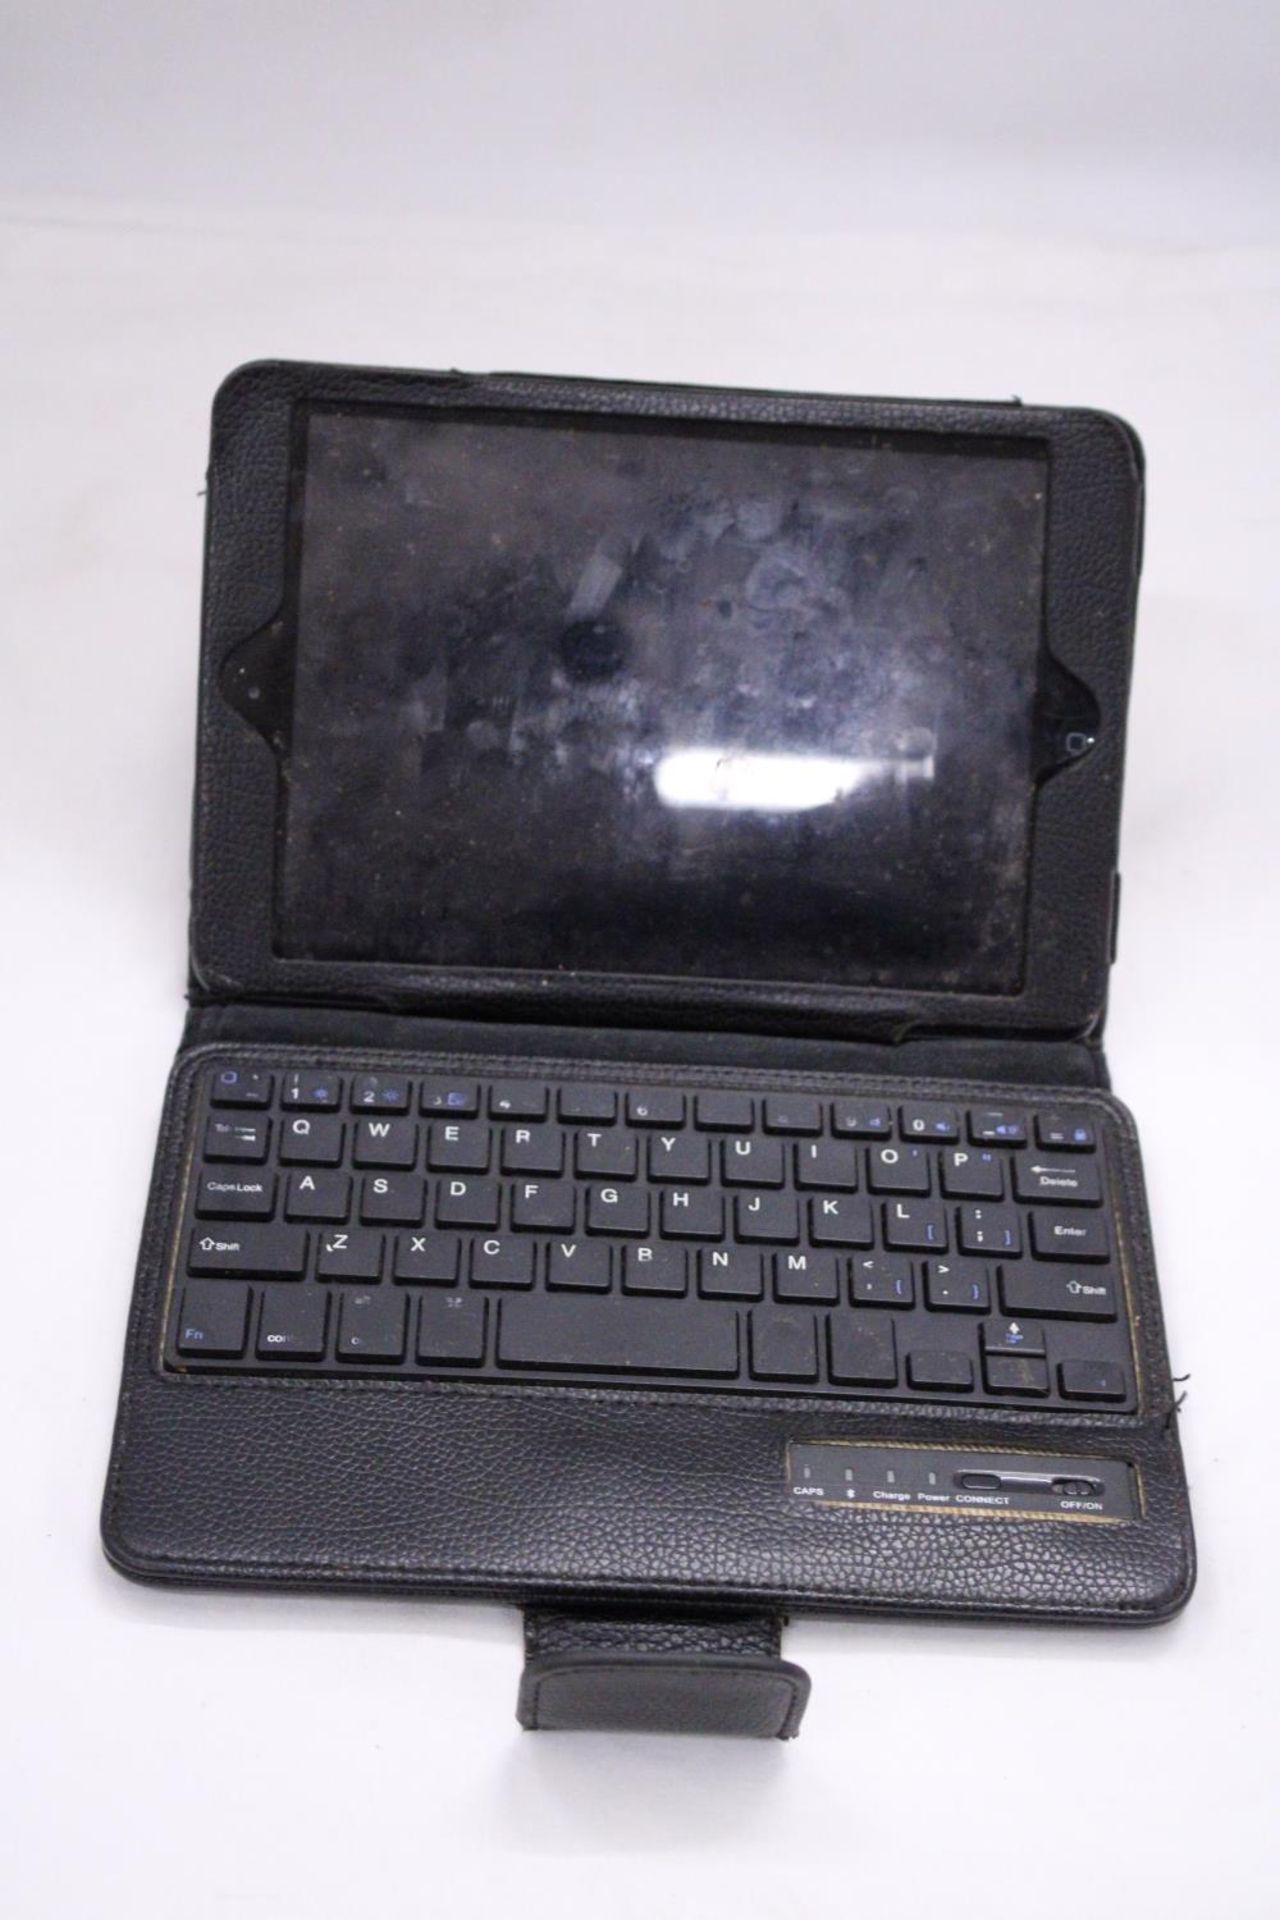 A CASED TABLET WITH KEYBOARD - NO WARRANTY GIVEN